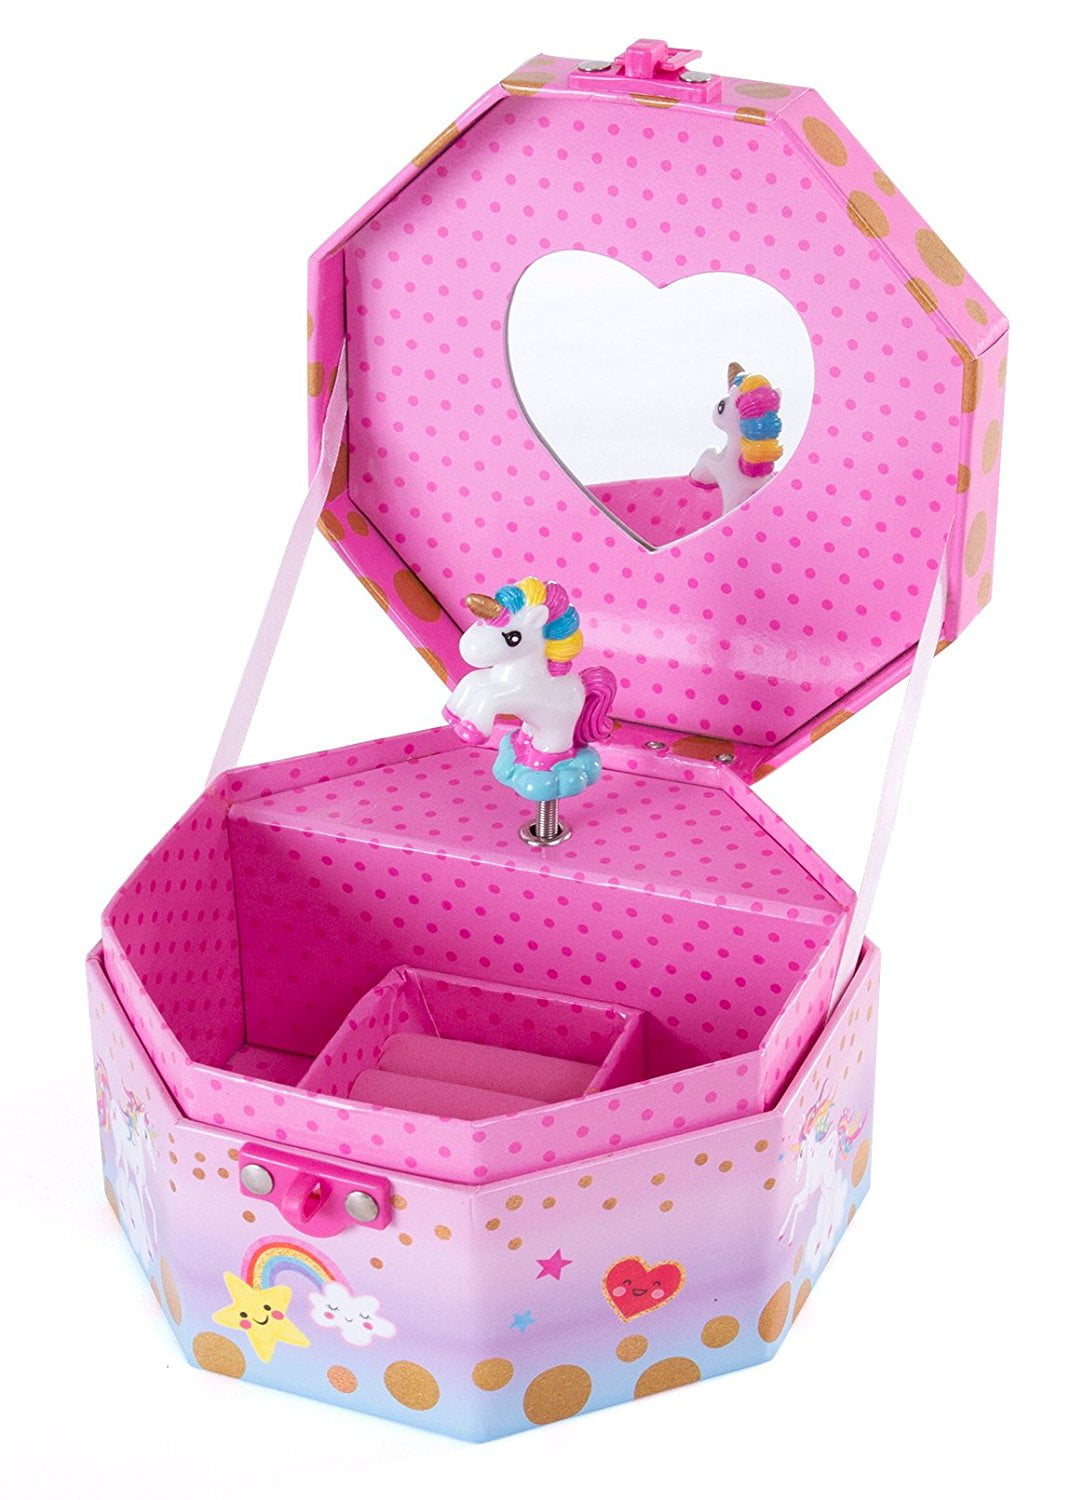 Traditional Clockwork Pink Music Box With Rotating Fairy Trinket Girls Gift Toys 